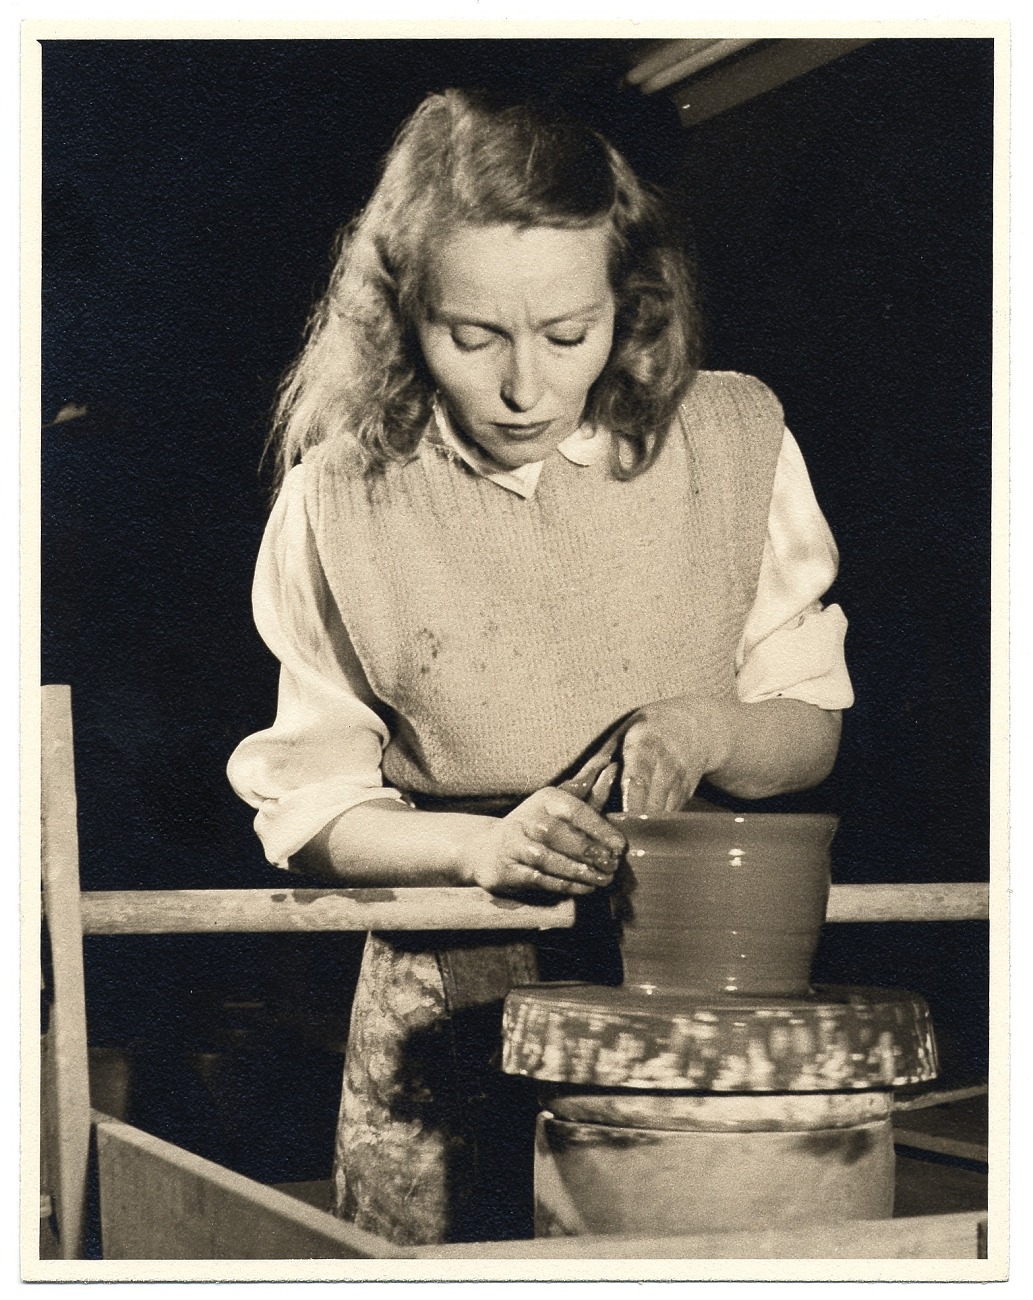 Sepia-toned photograph of Edith Heath working on the potery wheel.